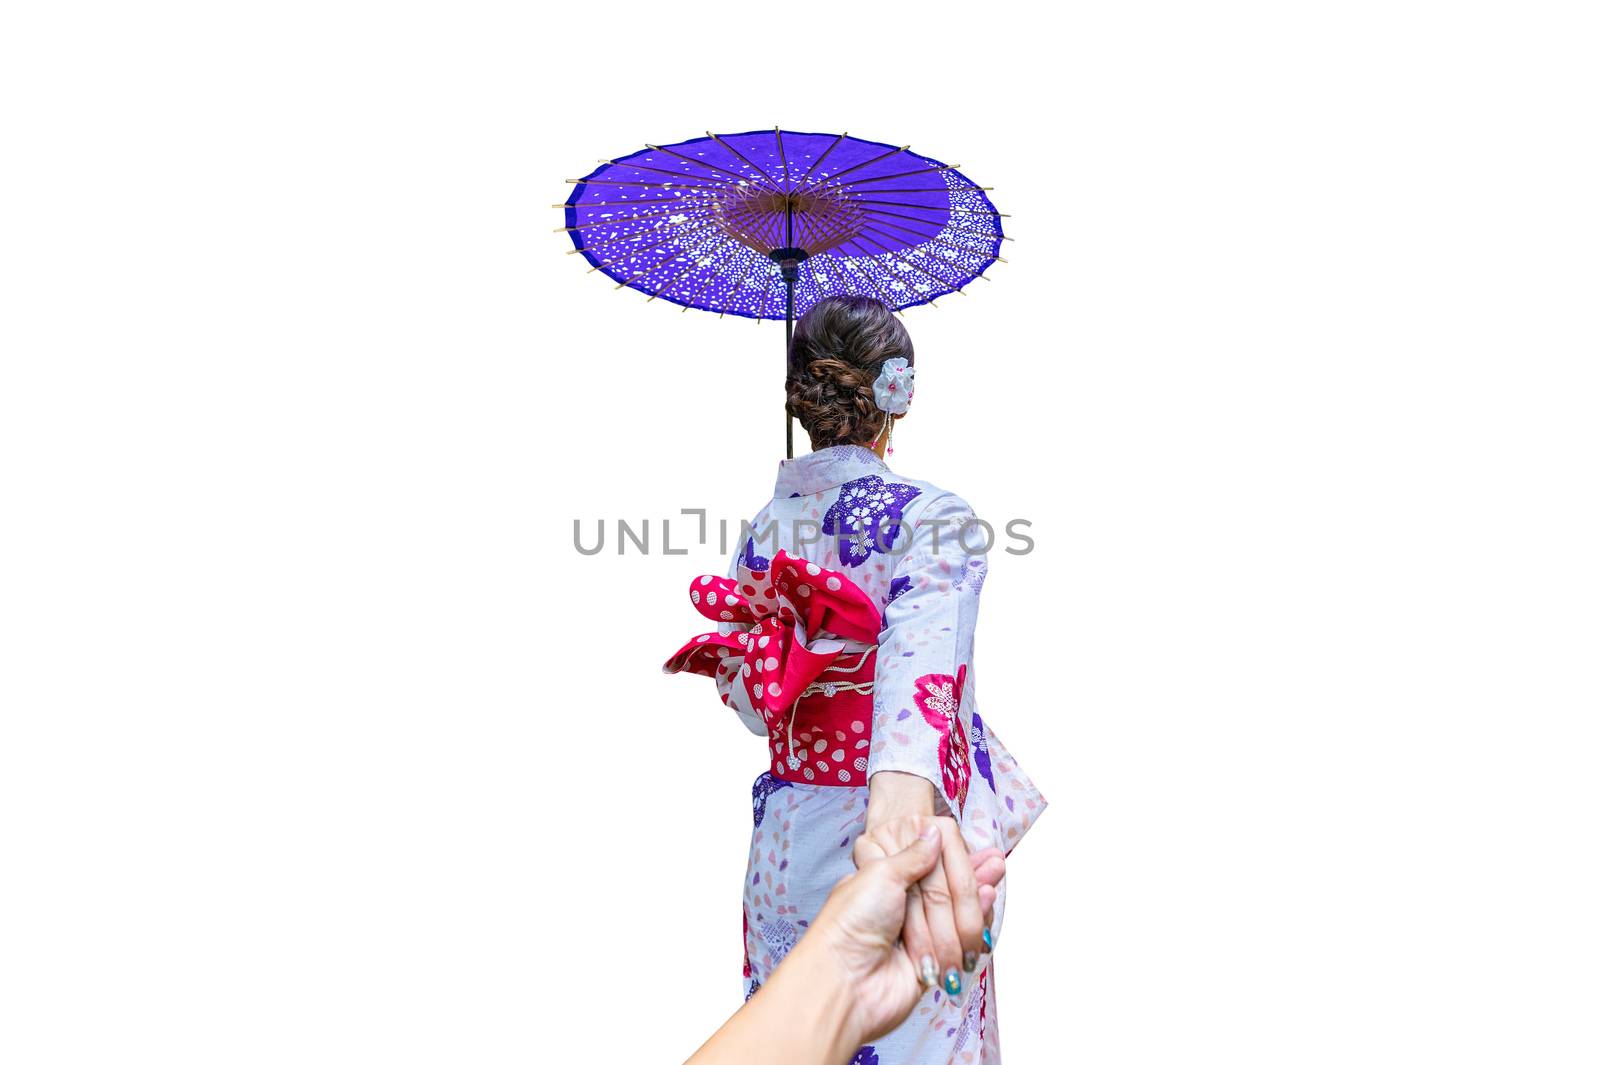 Asian woman wearing japanese traditional kimono with umbrella on white background. by gutarphotoghaphy